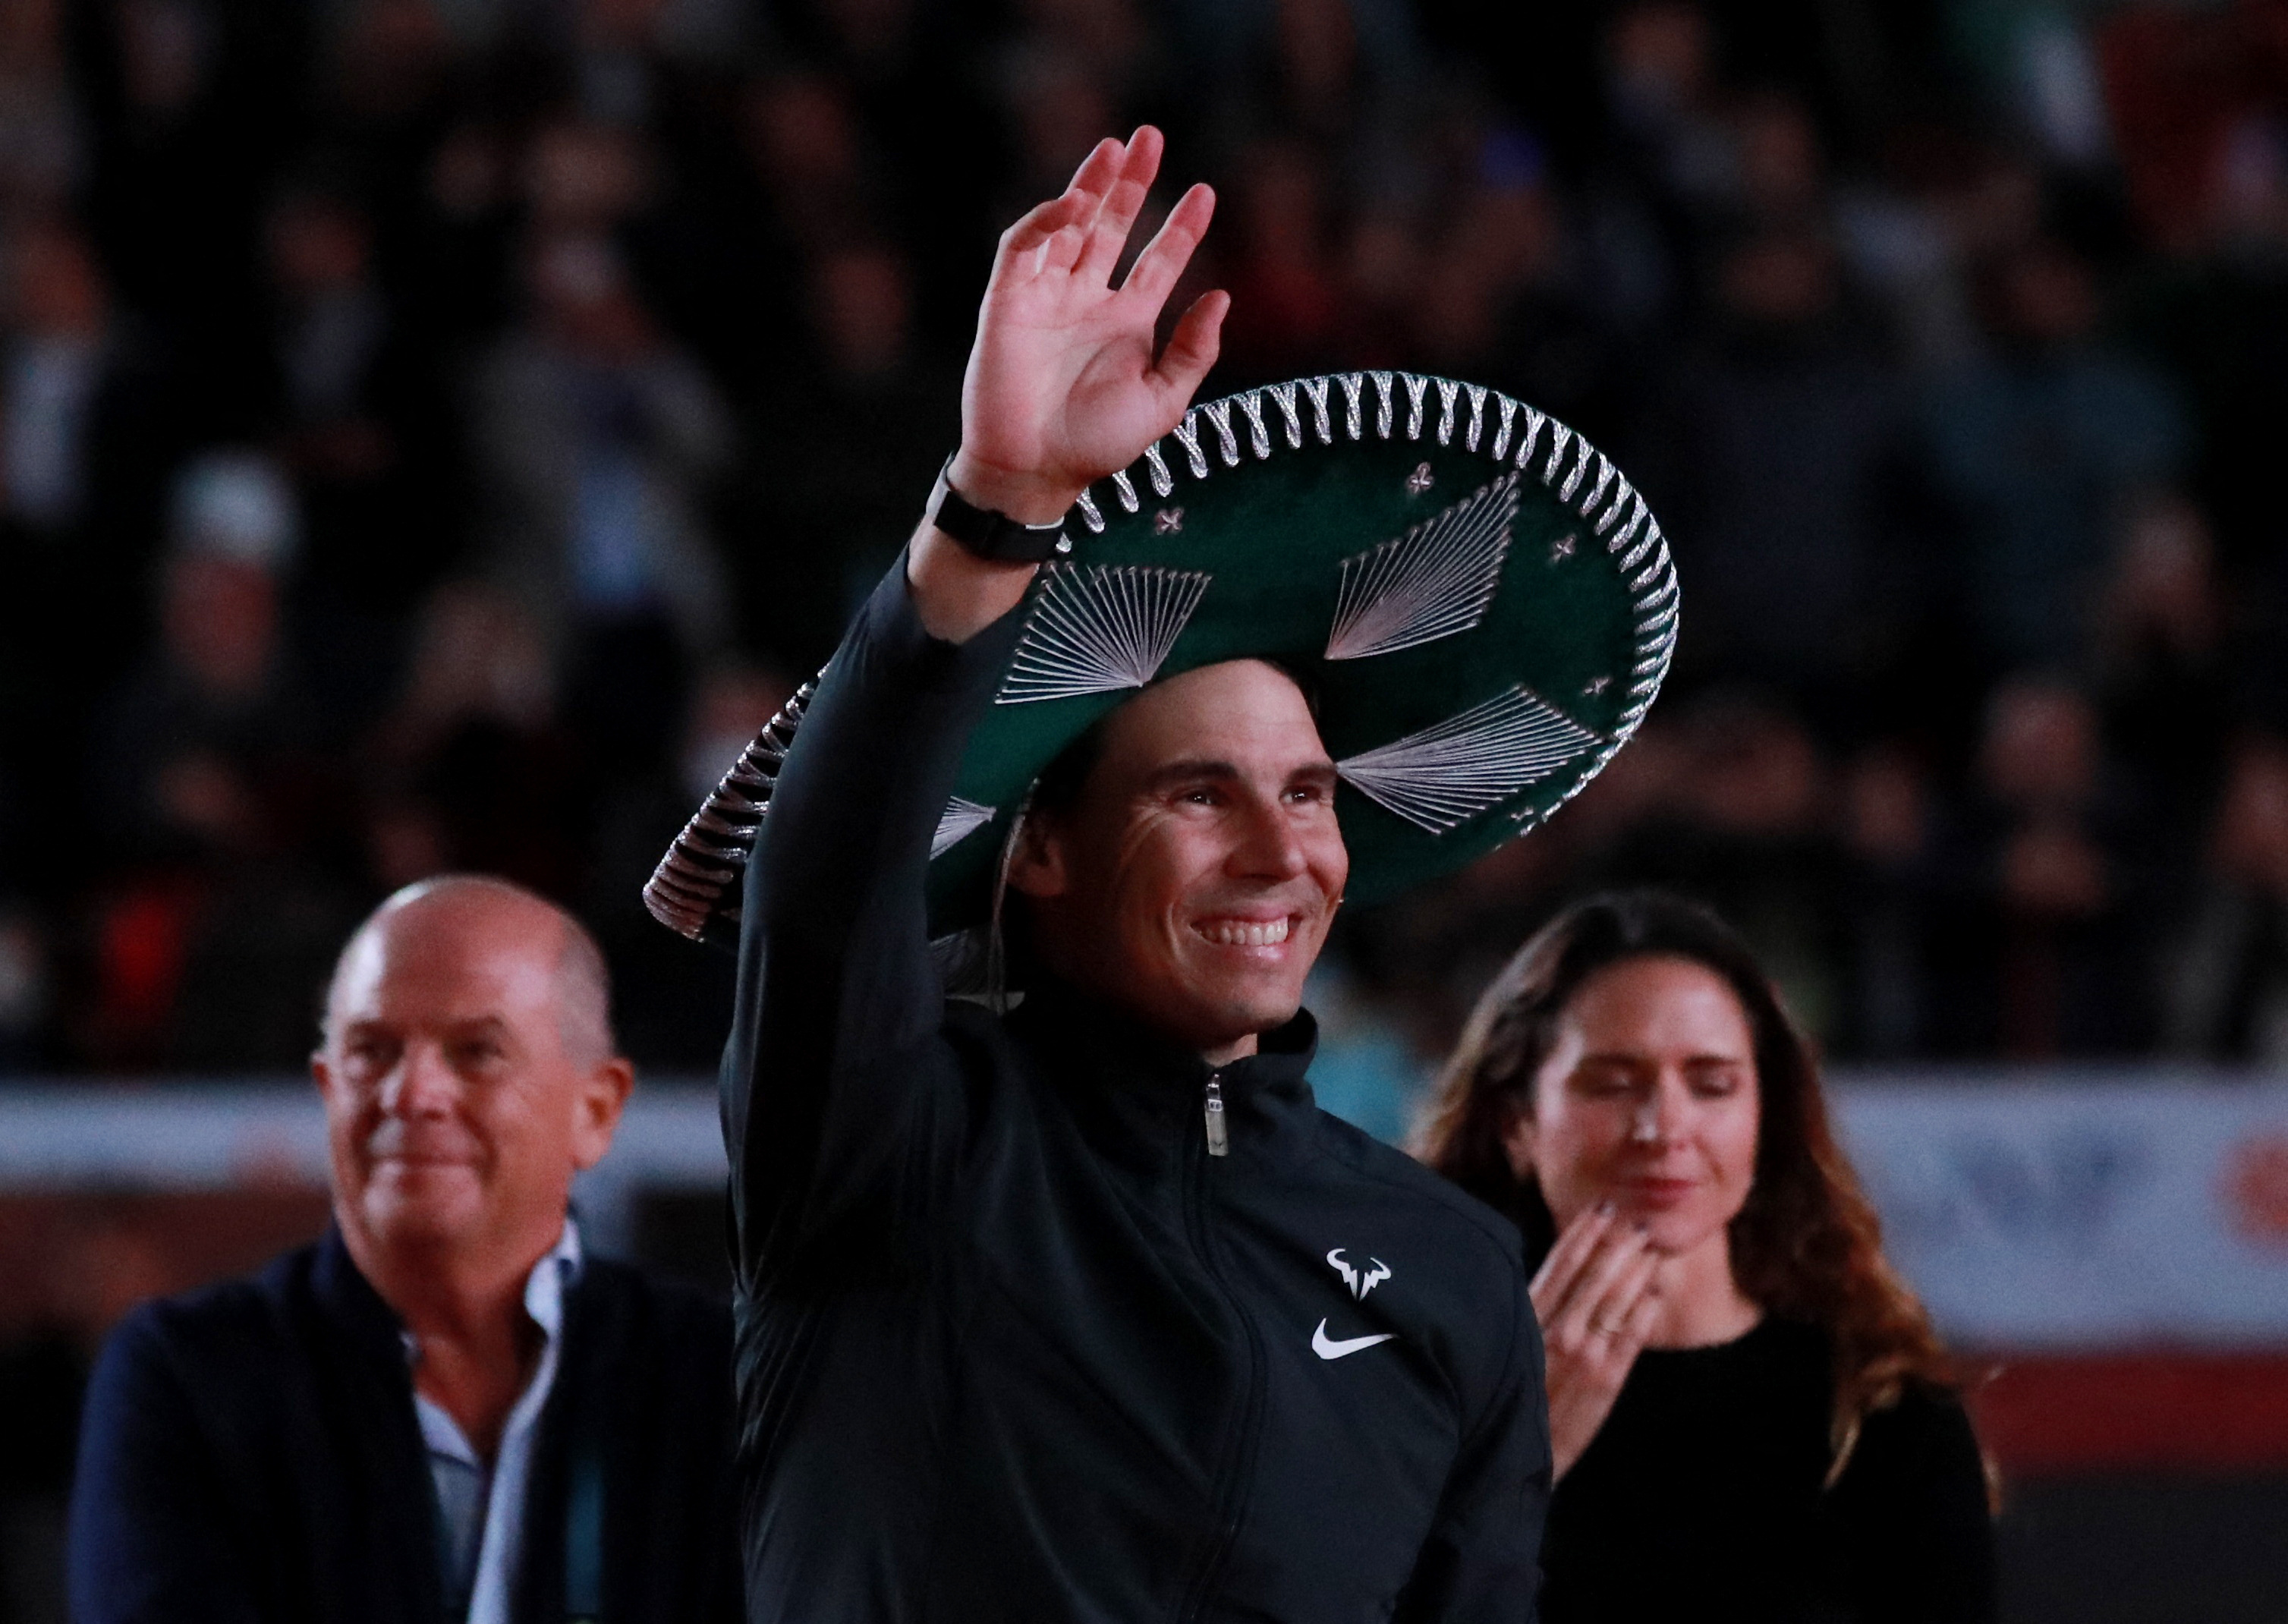 Rafael Nadal exhibition match in Mexico City